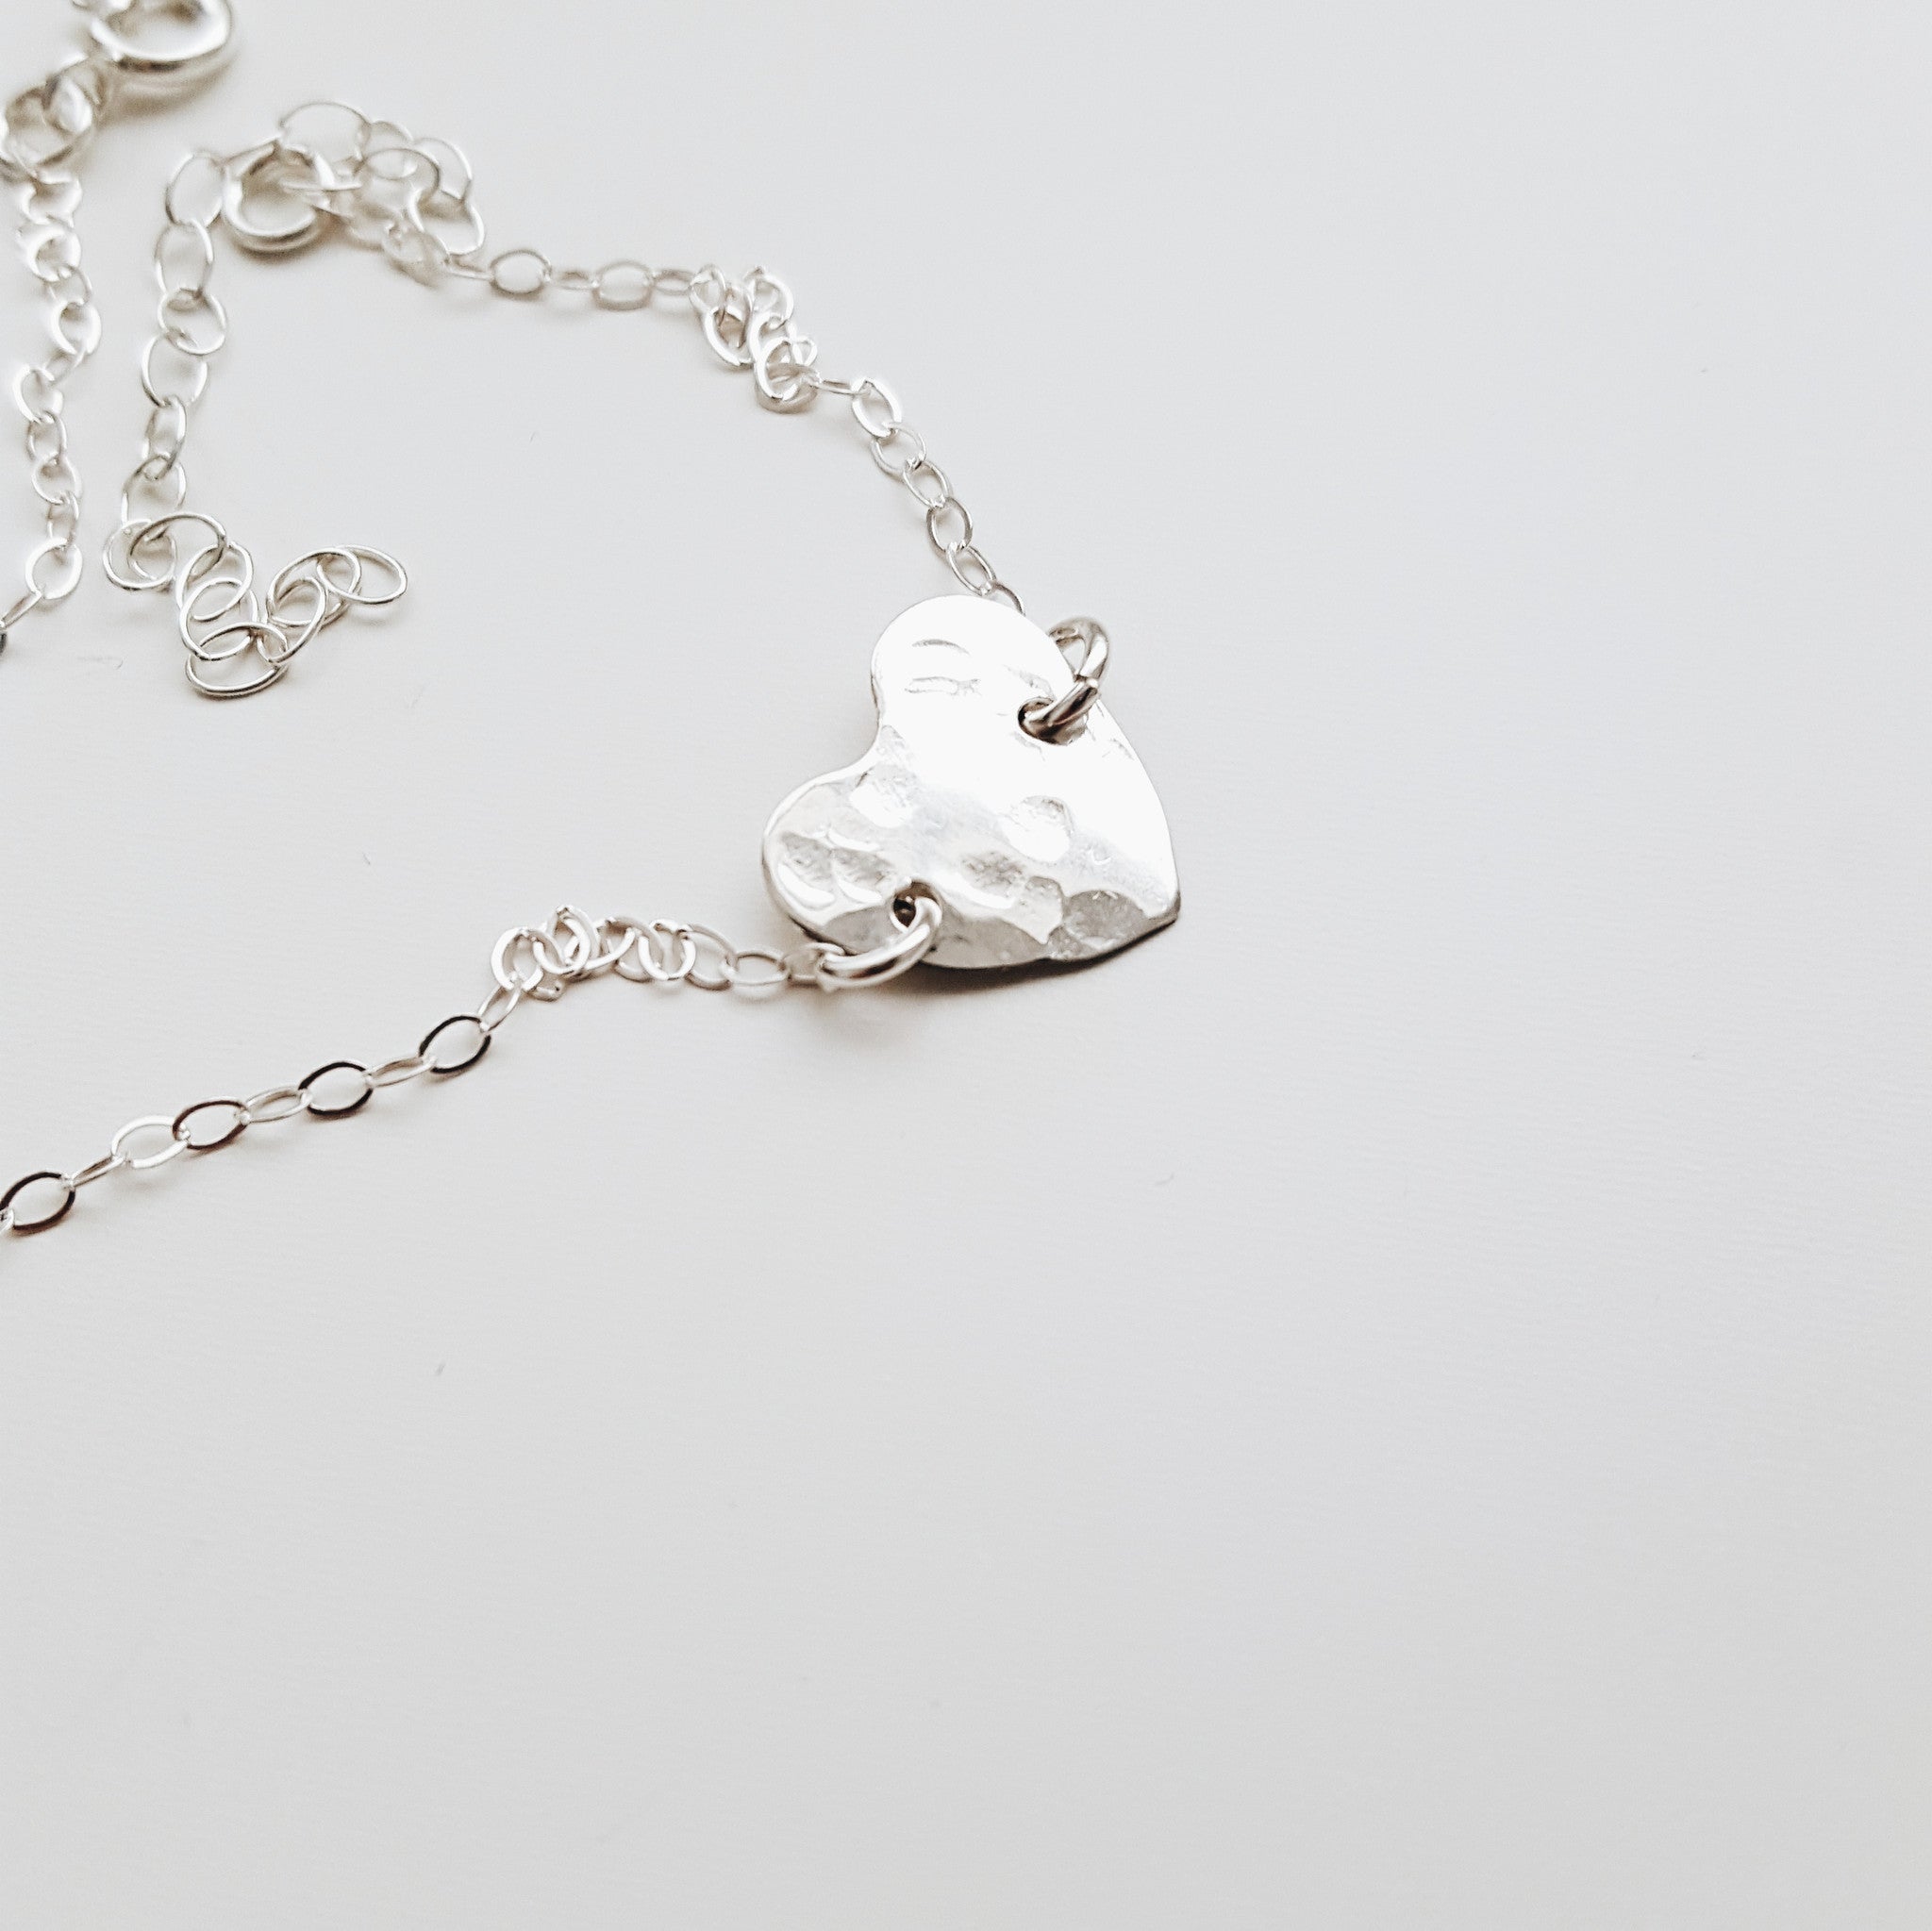 a small silver hammered heart pendant on a silver chain with a white backgroud